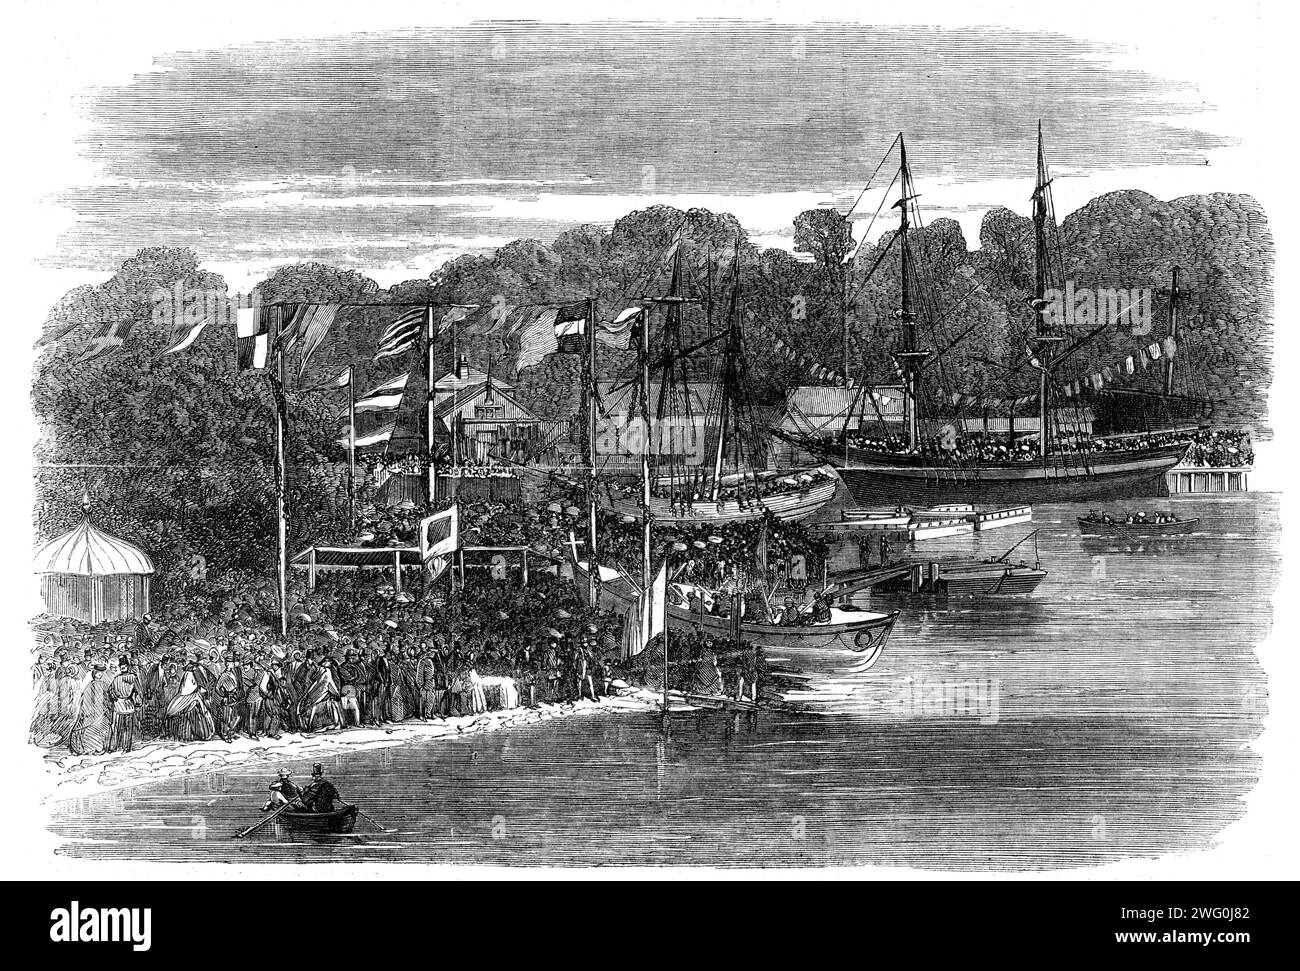 The launch of the Ipswich Life-Boat, 1862. Engraving from a photograph by Mr. Dixon Piper. 'It is calculated that from 30,000 to 40,000 persons attended...The life-boat, which has been built with much pains, and with the latest improvements, was drawn on its carriage by eight beautiful horses...through the principal streets, until it found its natural element in the broad stream of the Orwell...Mr. Thomas Baring, M.P., chairman of the institution, then said: This was a bright and encouraging day for the Royal National Lifeboat Institution...It was a source of great satisfaction to find that th Stock Photo